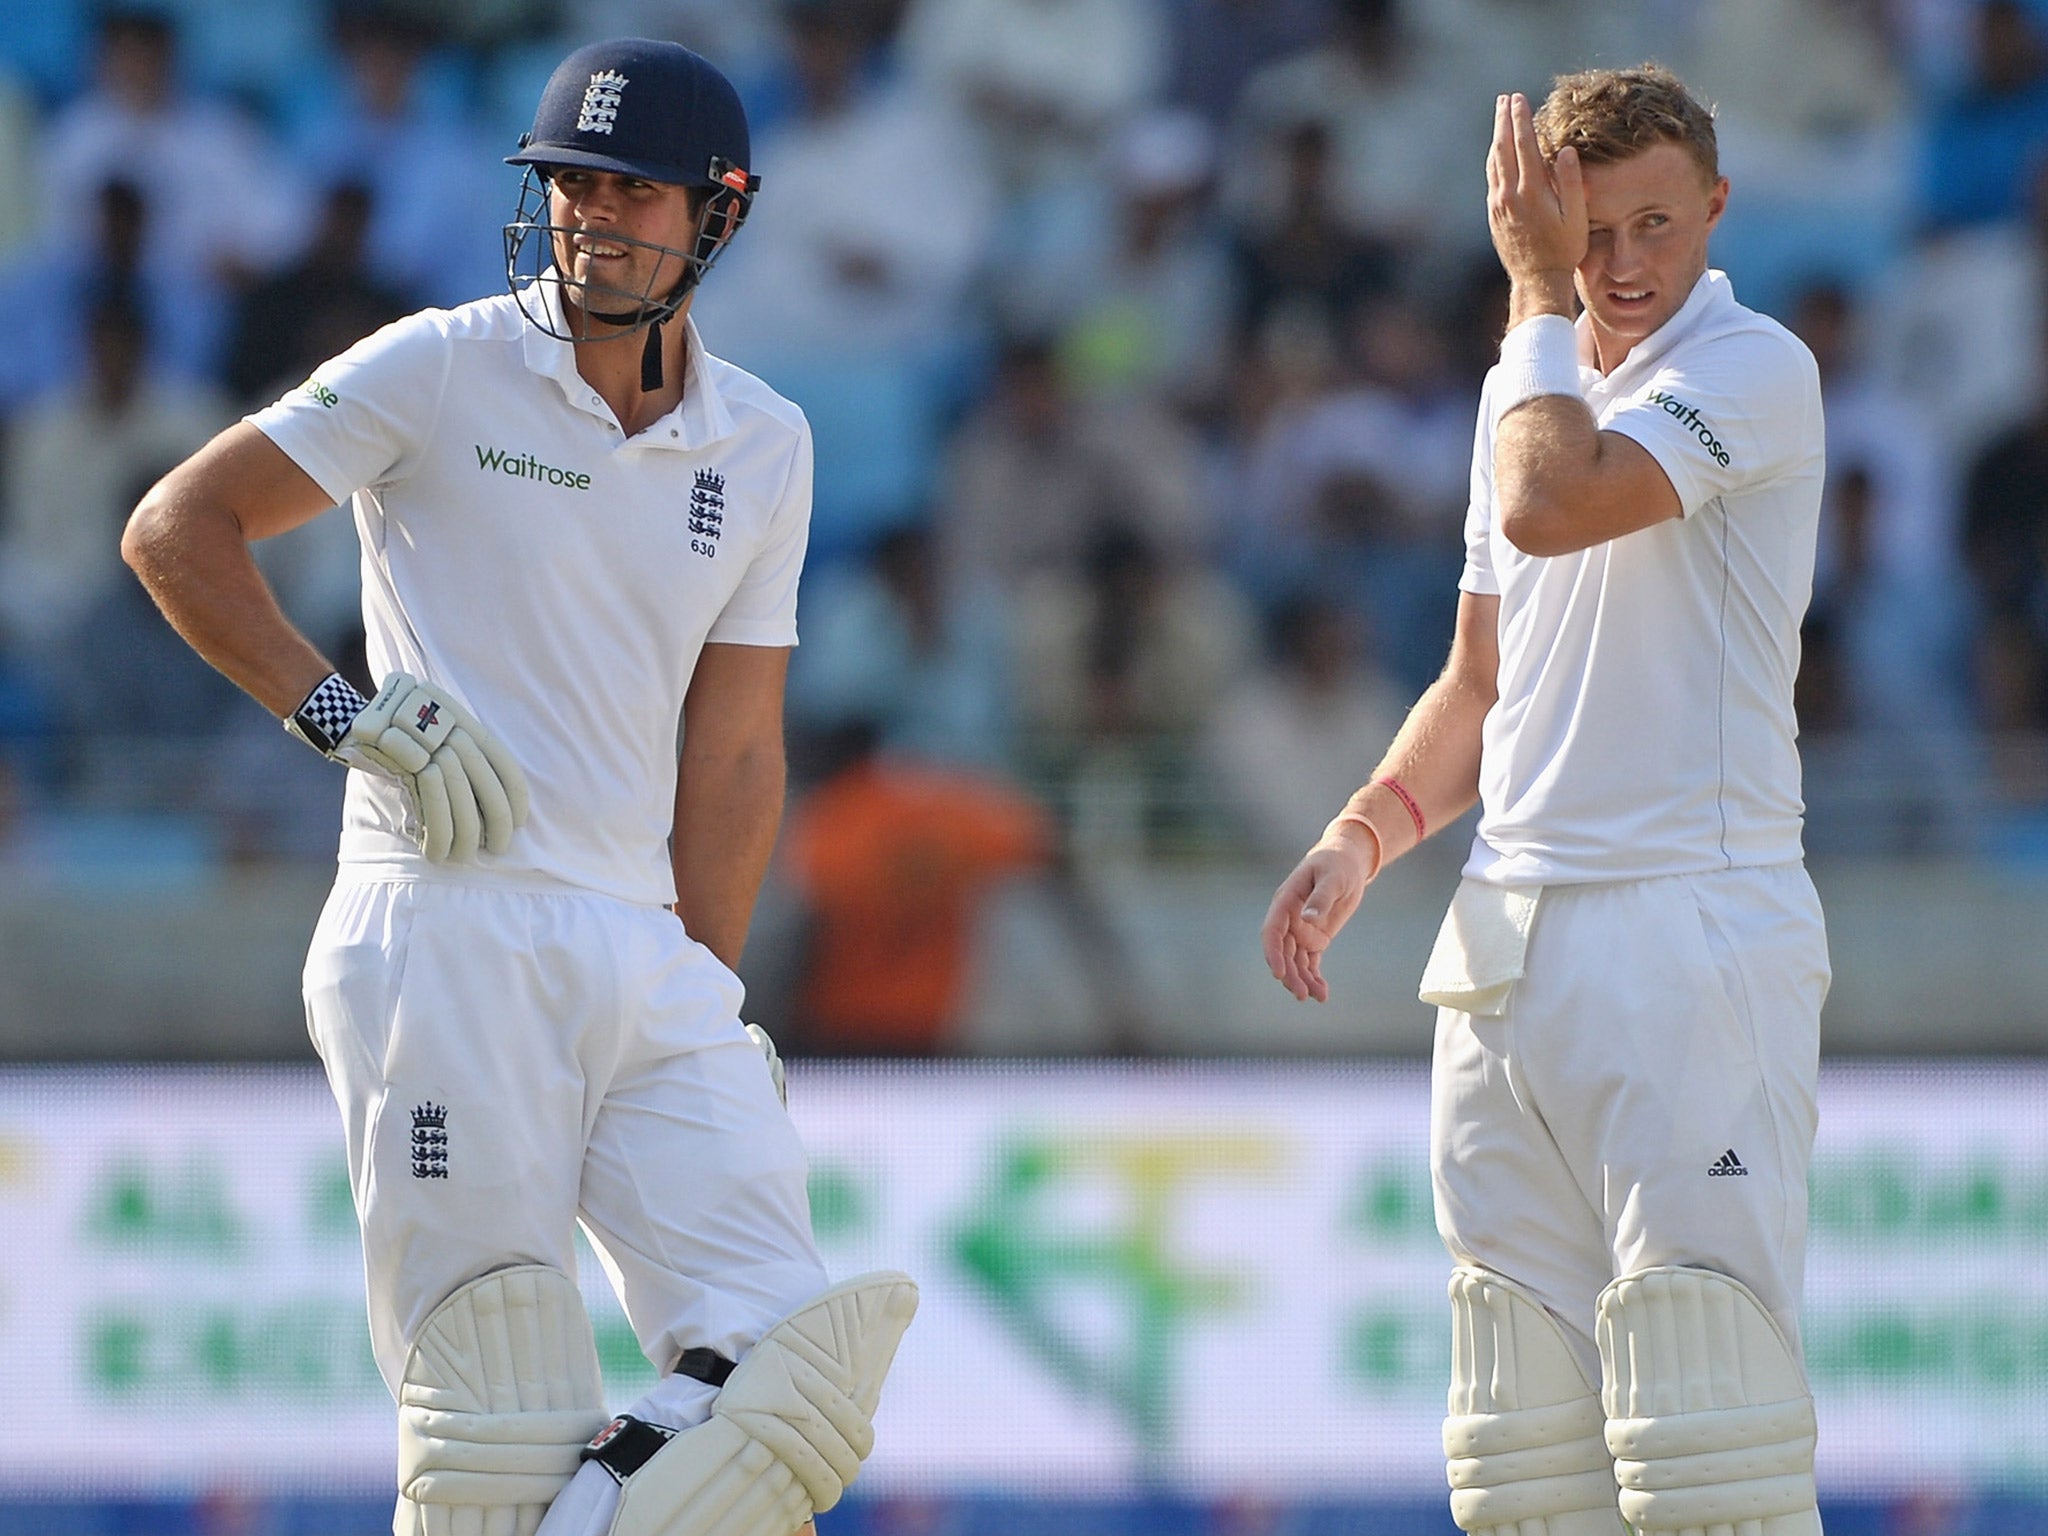 While Alastair Cook and Joe Root are among the best batsmen in the game, England need other players to step up